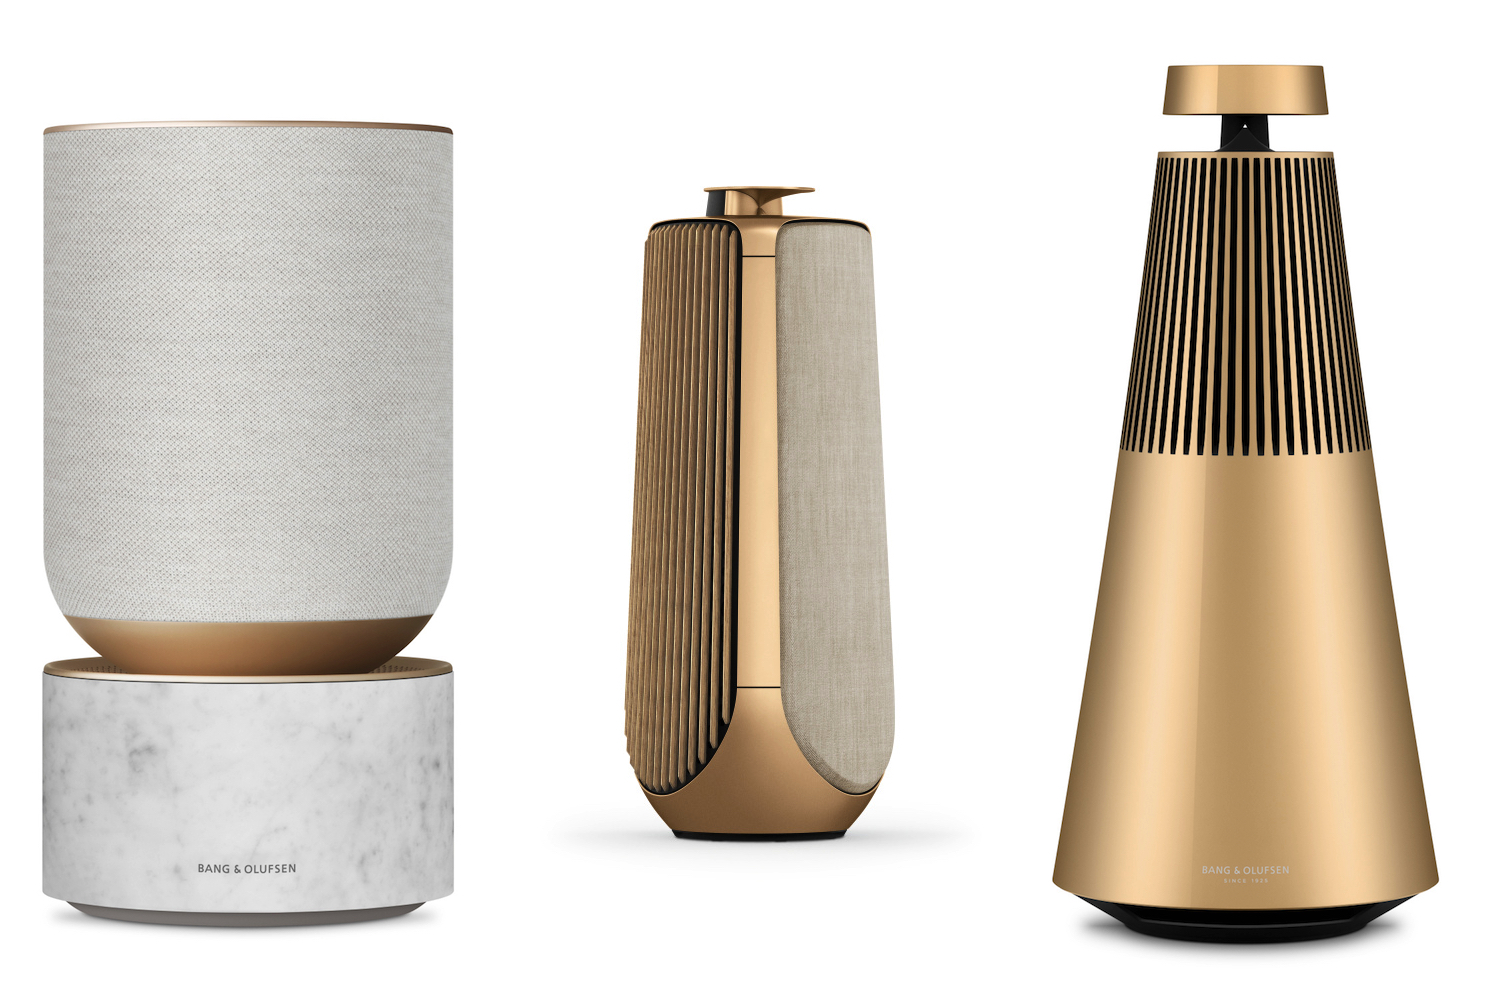 bang and olufsen 95 anniversary golden collection interview gold speakers